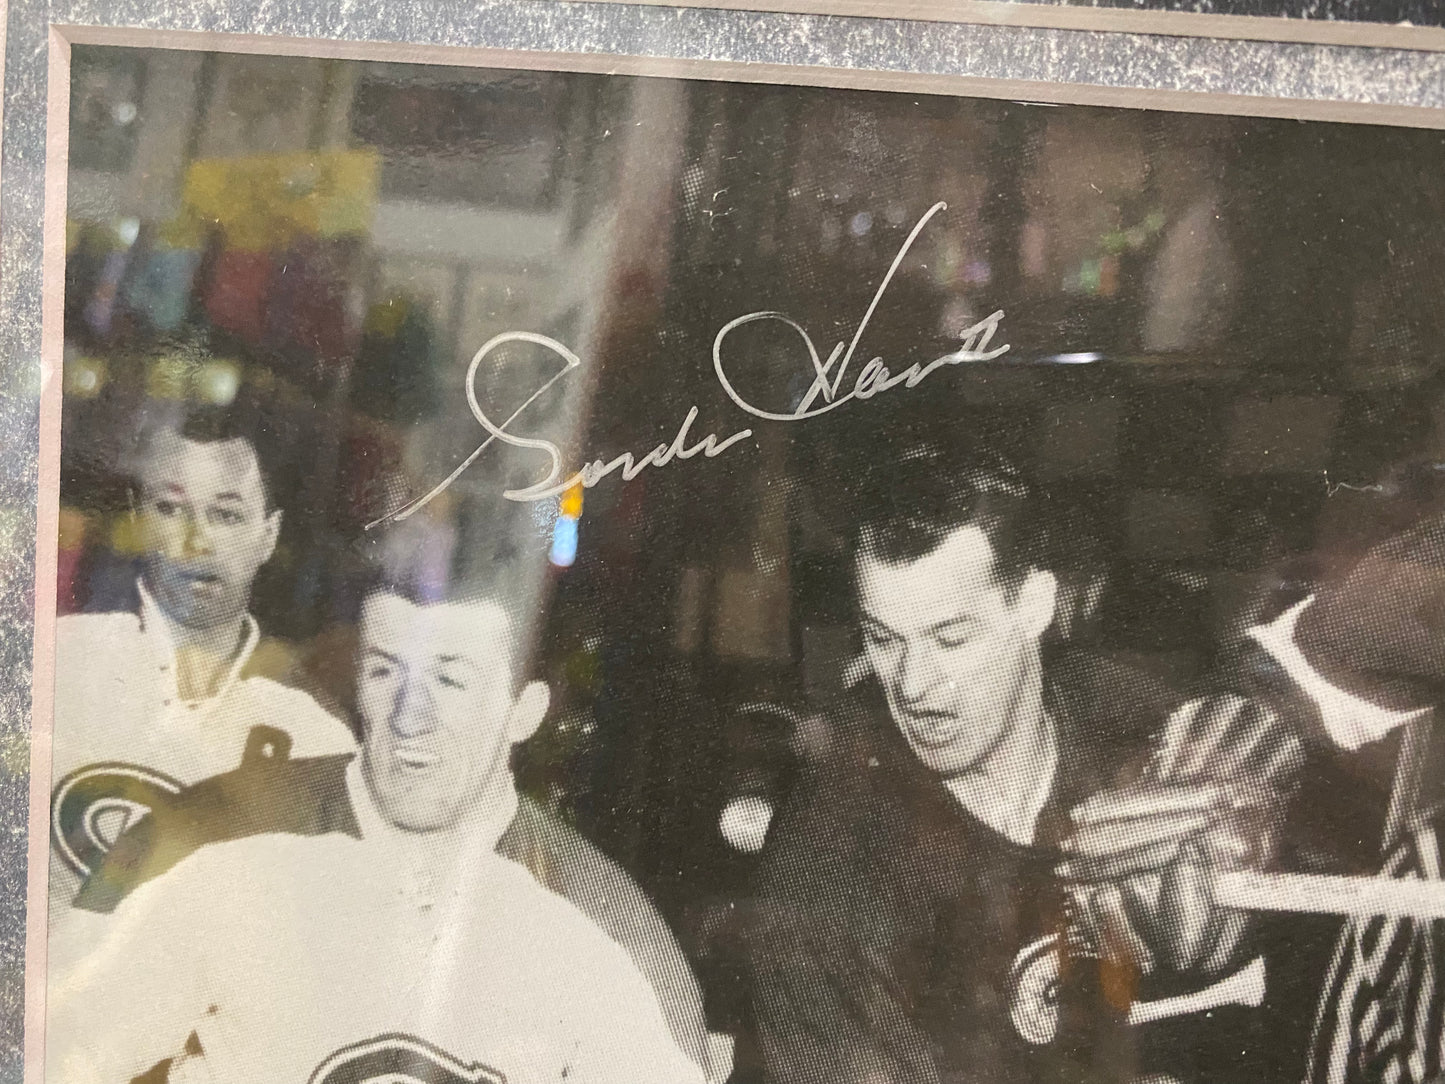 Gordie Howe and Ted Lindsay Autograph